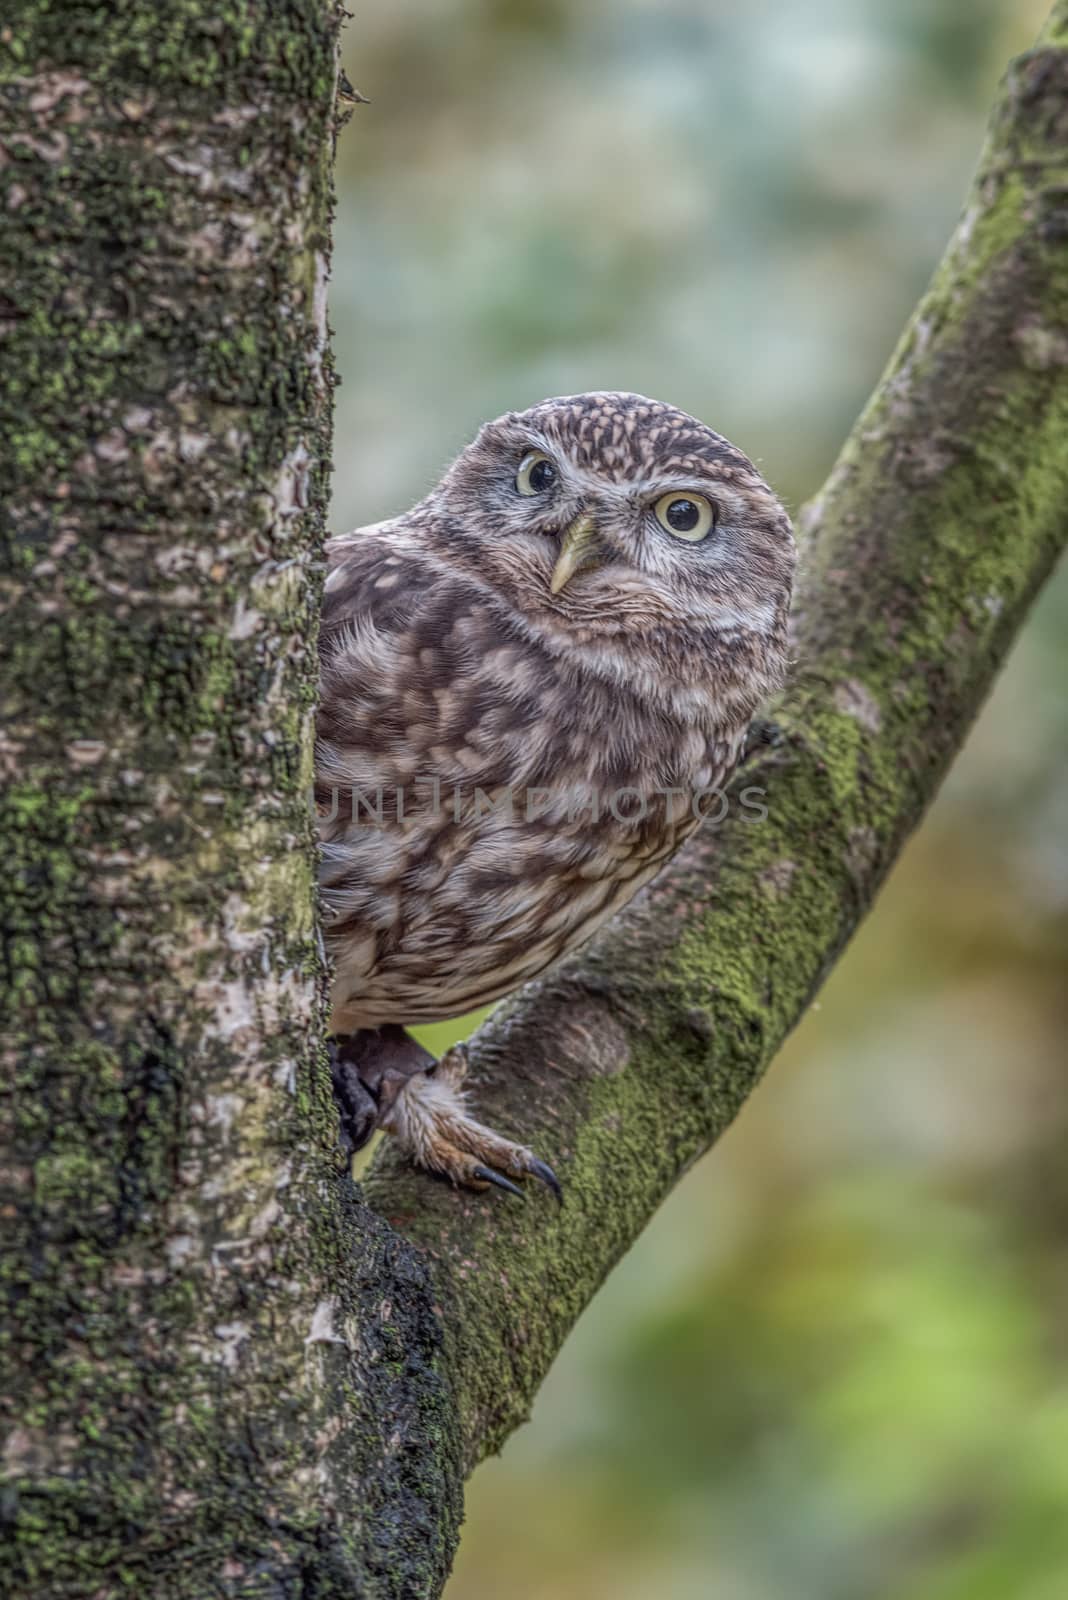 A close up of an alert  captive little owl perched in the fork of a tree peeping out from behind the trunk